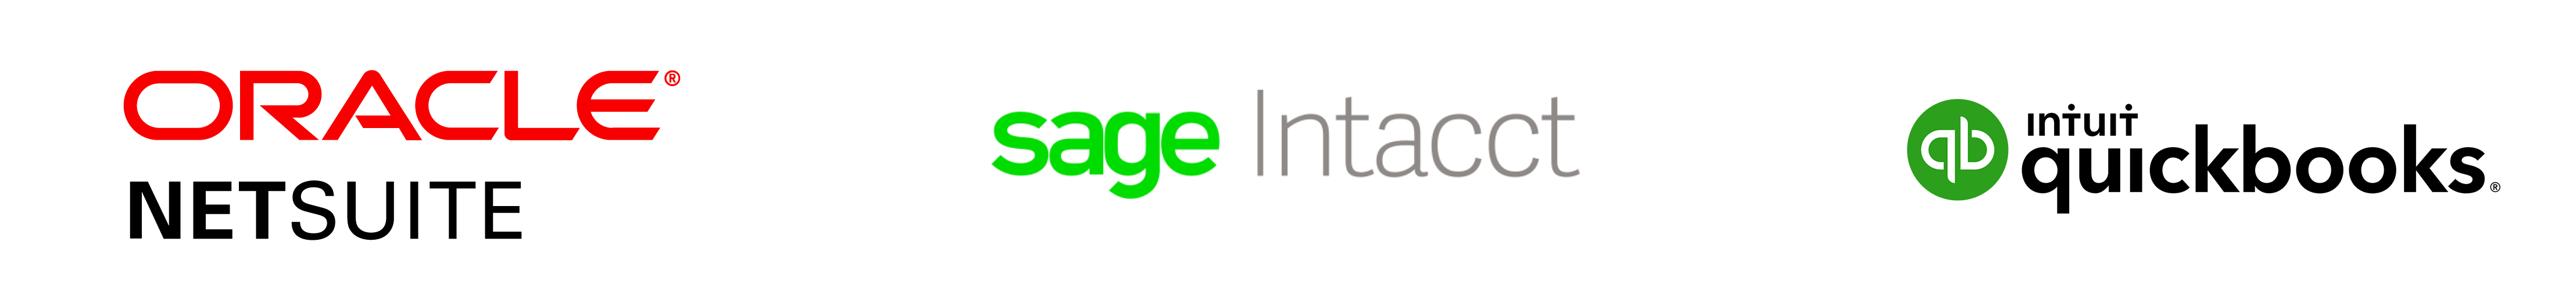 Oracle NetSuite, Sage Intacct, and Intuit Quickbooks logos.